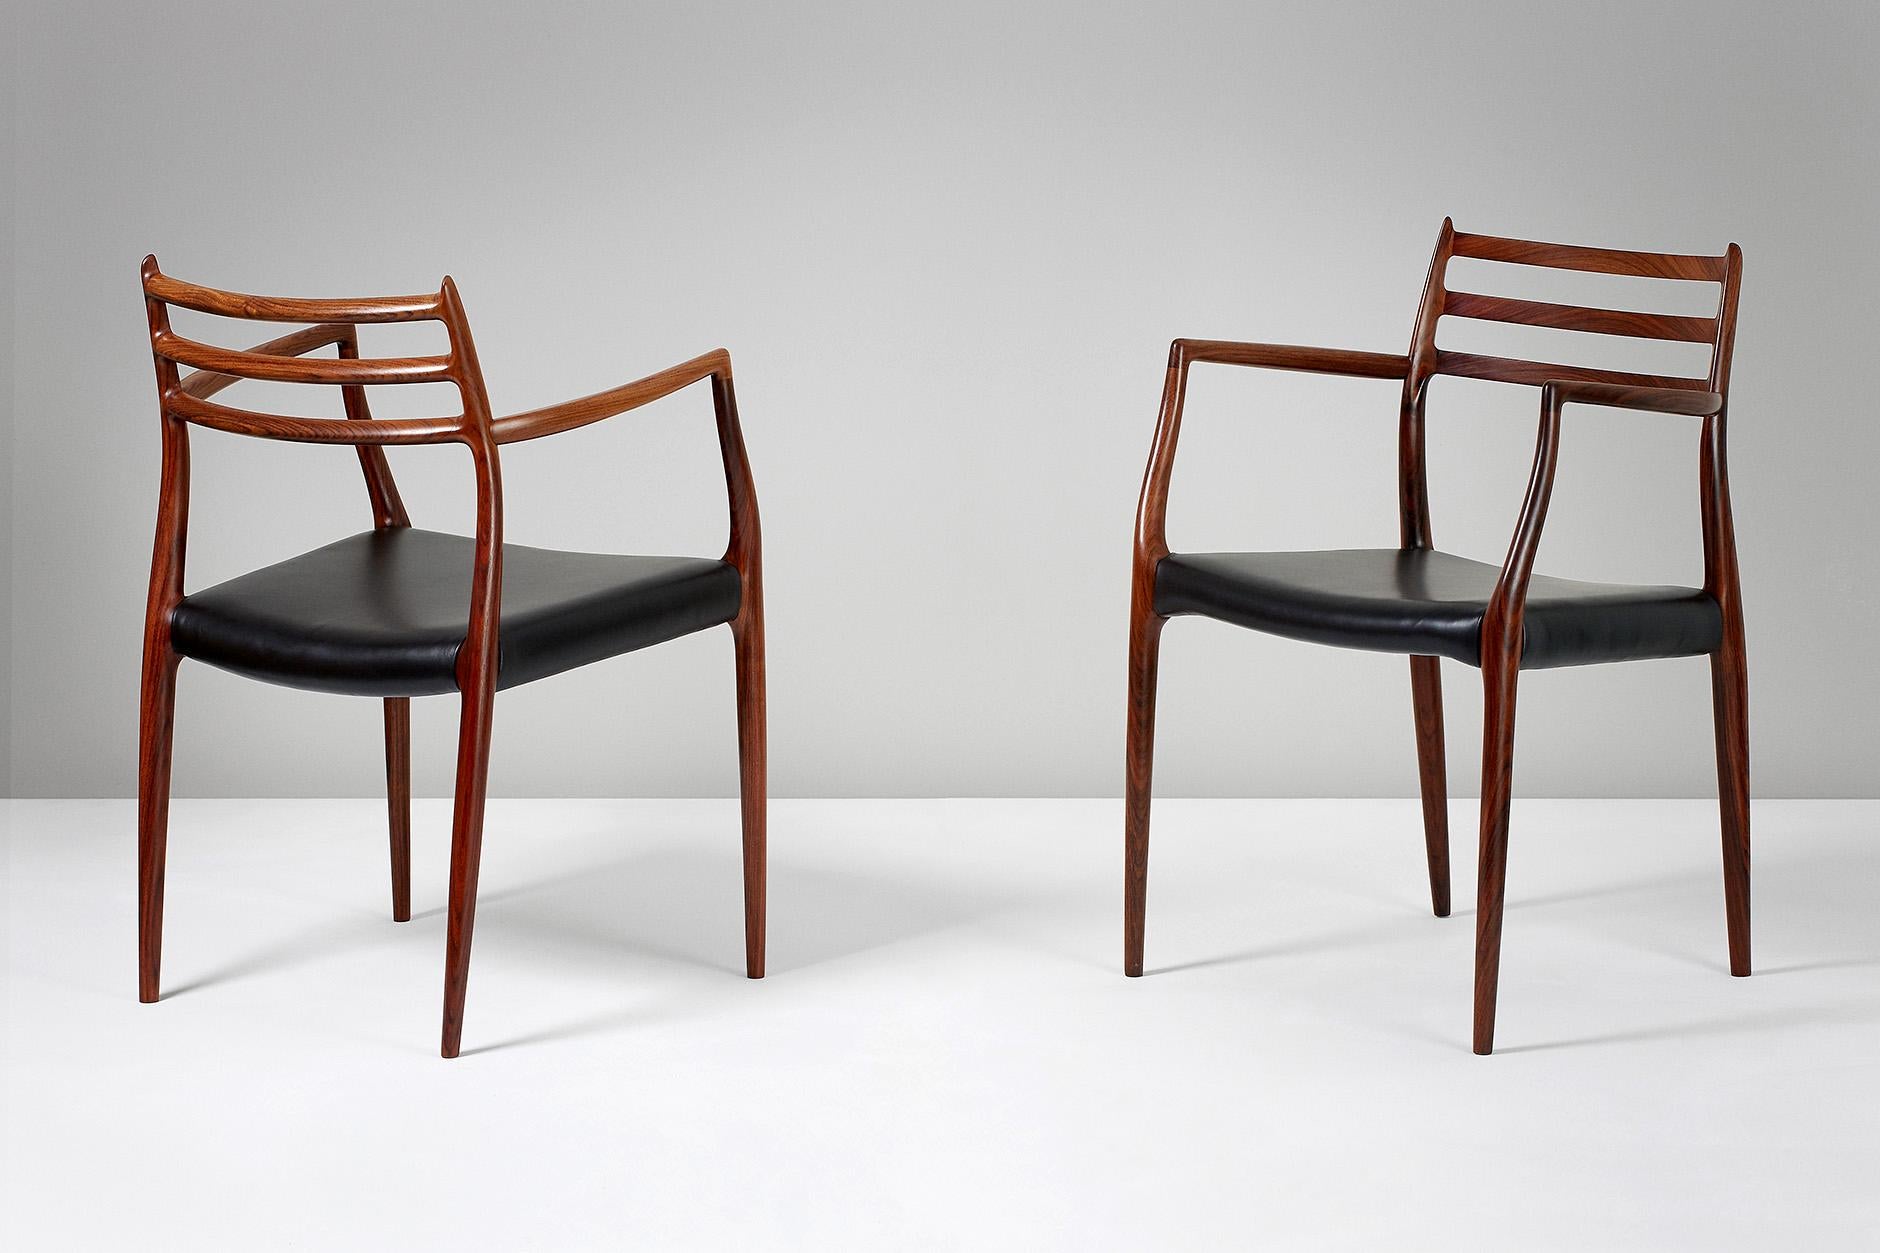 Niels Moller

Model 62 armchair, 1962

Rosewood armchairs designed by Niels Moller for J.L. Moller Mobelfabrik, Denmark, 1962. New black aniline leather seats. 

Dimensions: H 80cm, D 55cm, W 56cm

  